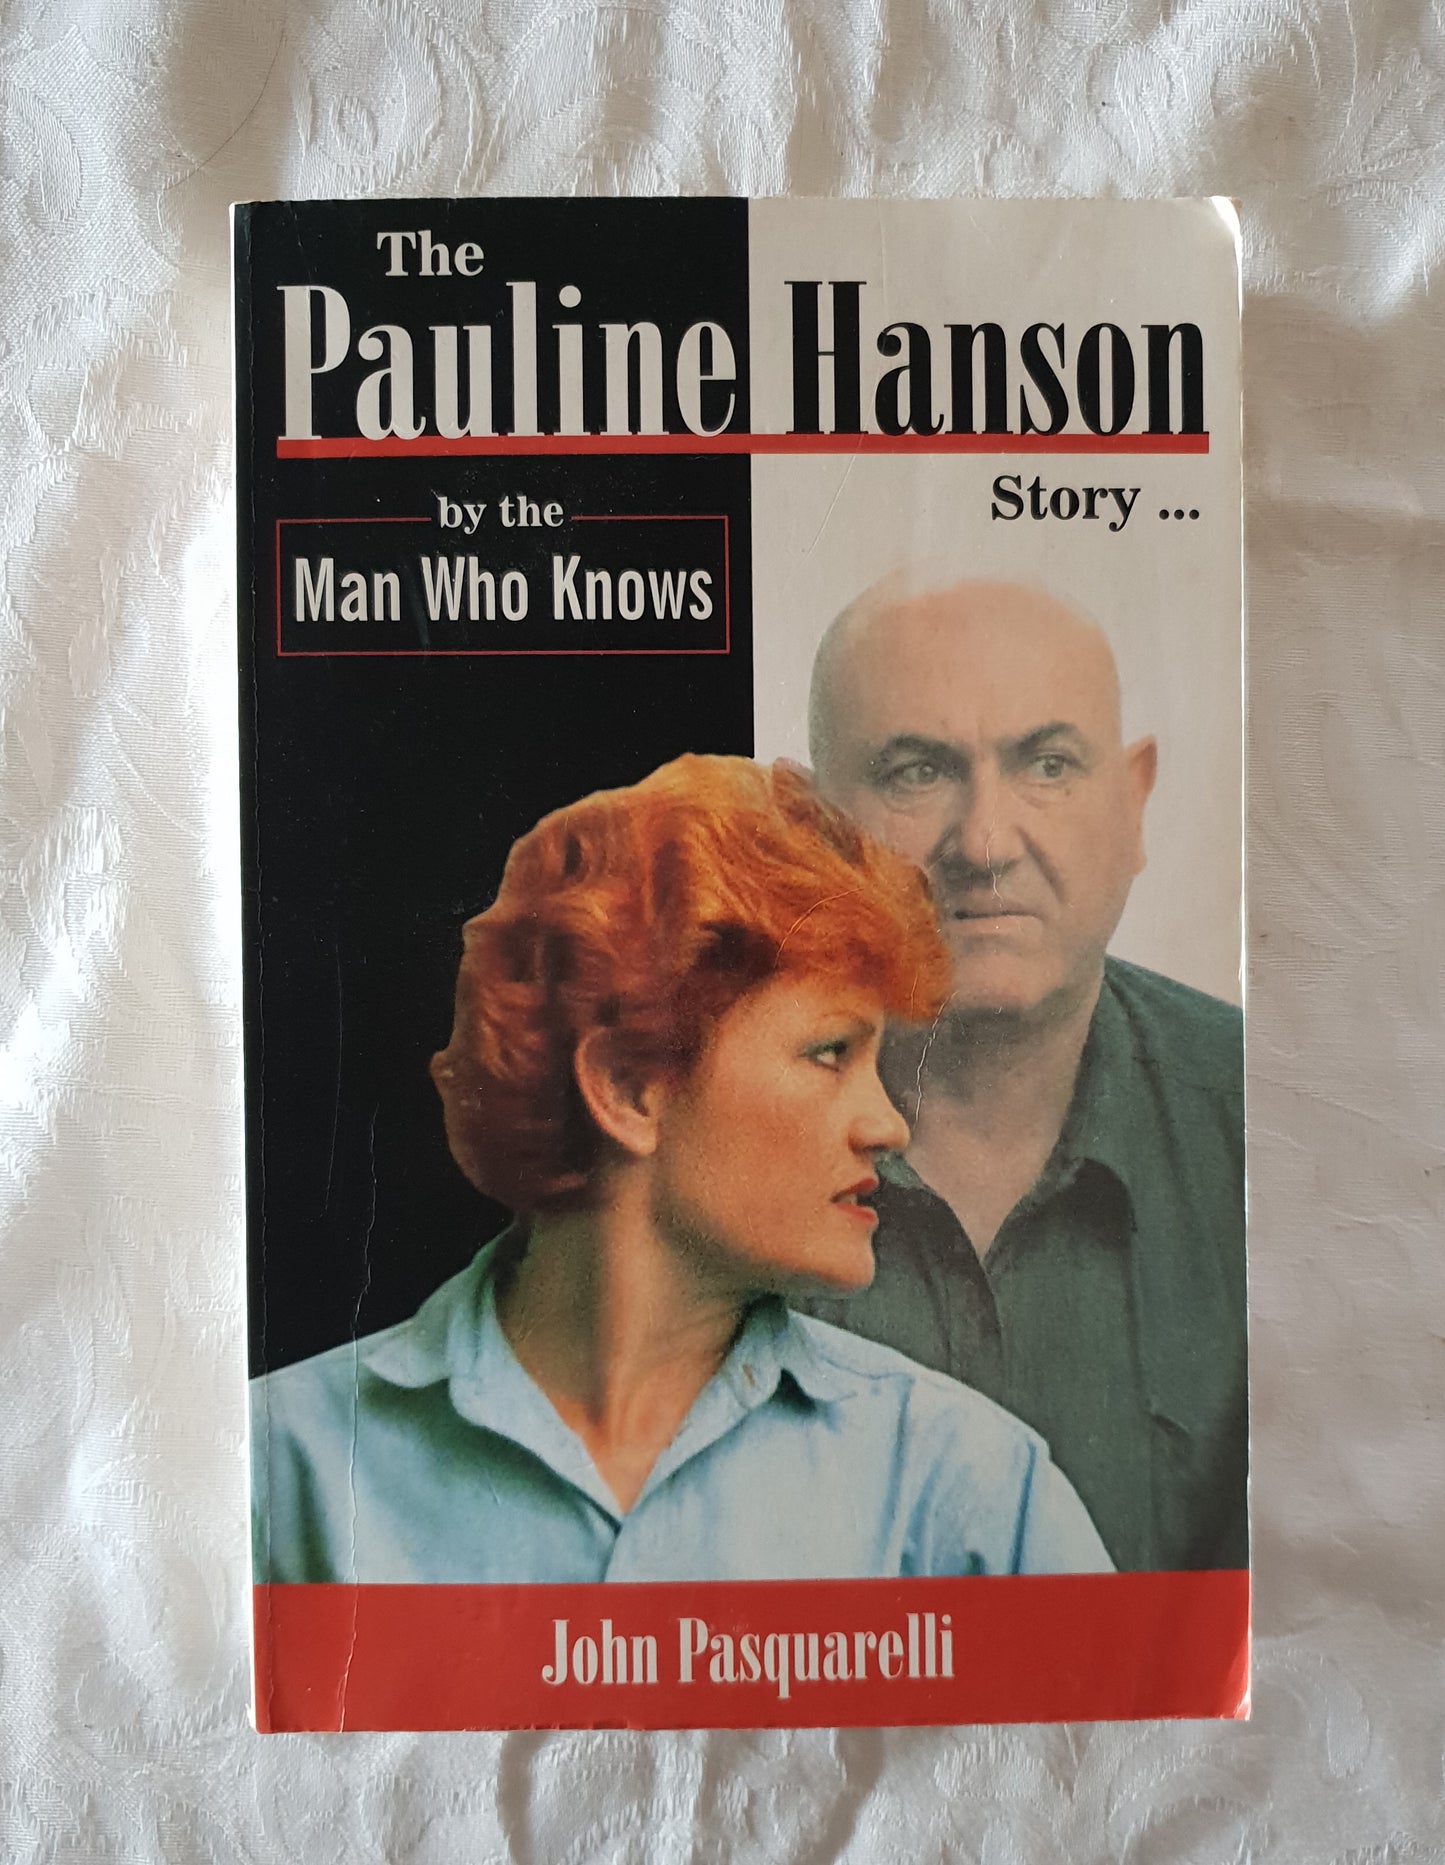 The Pauline Hanson Story ...  by the Man Who Knows  by John Pasquarelli